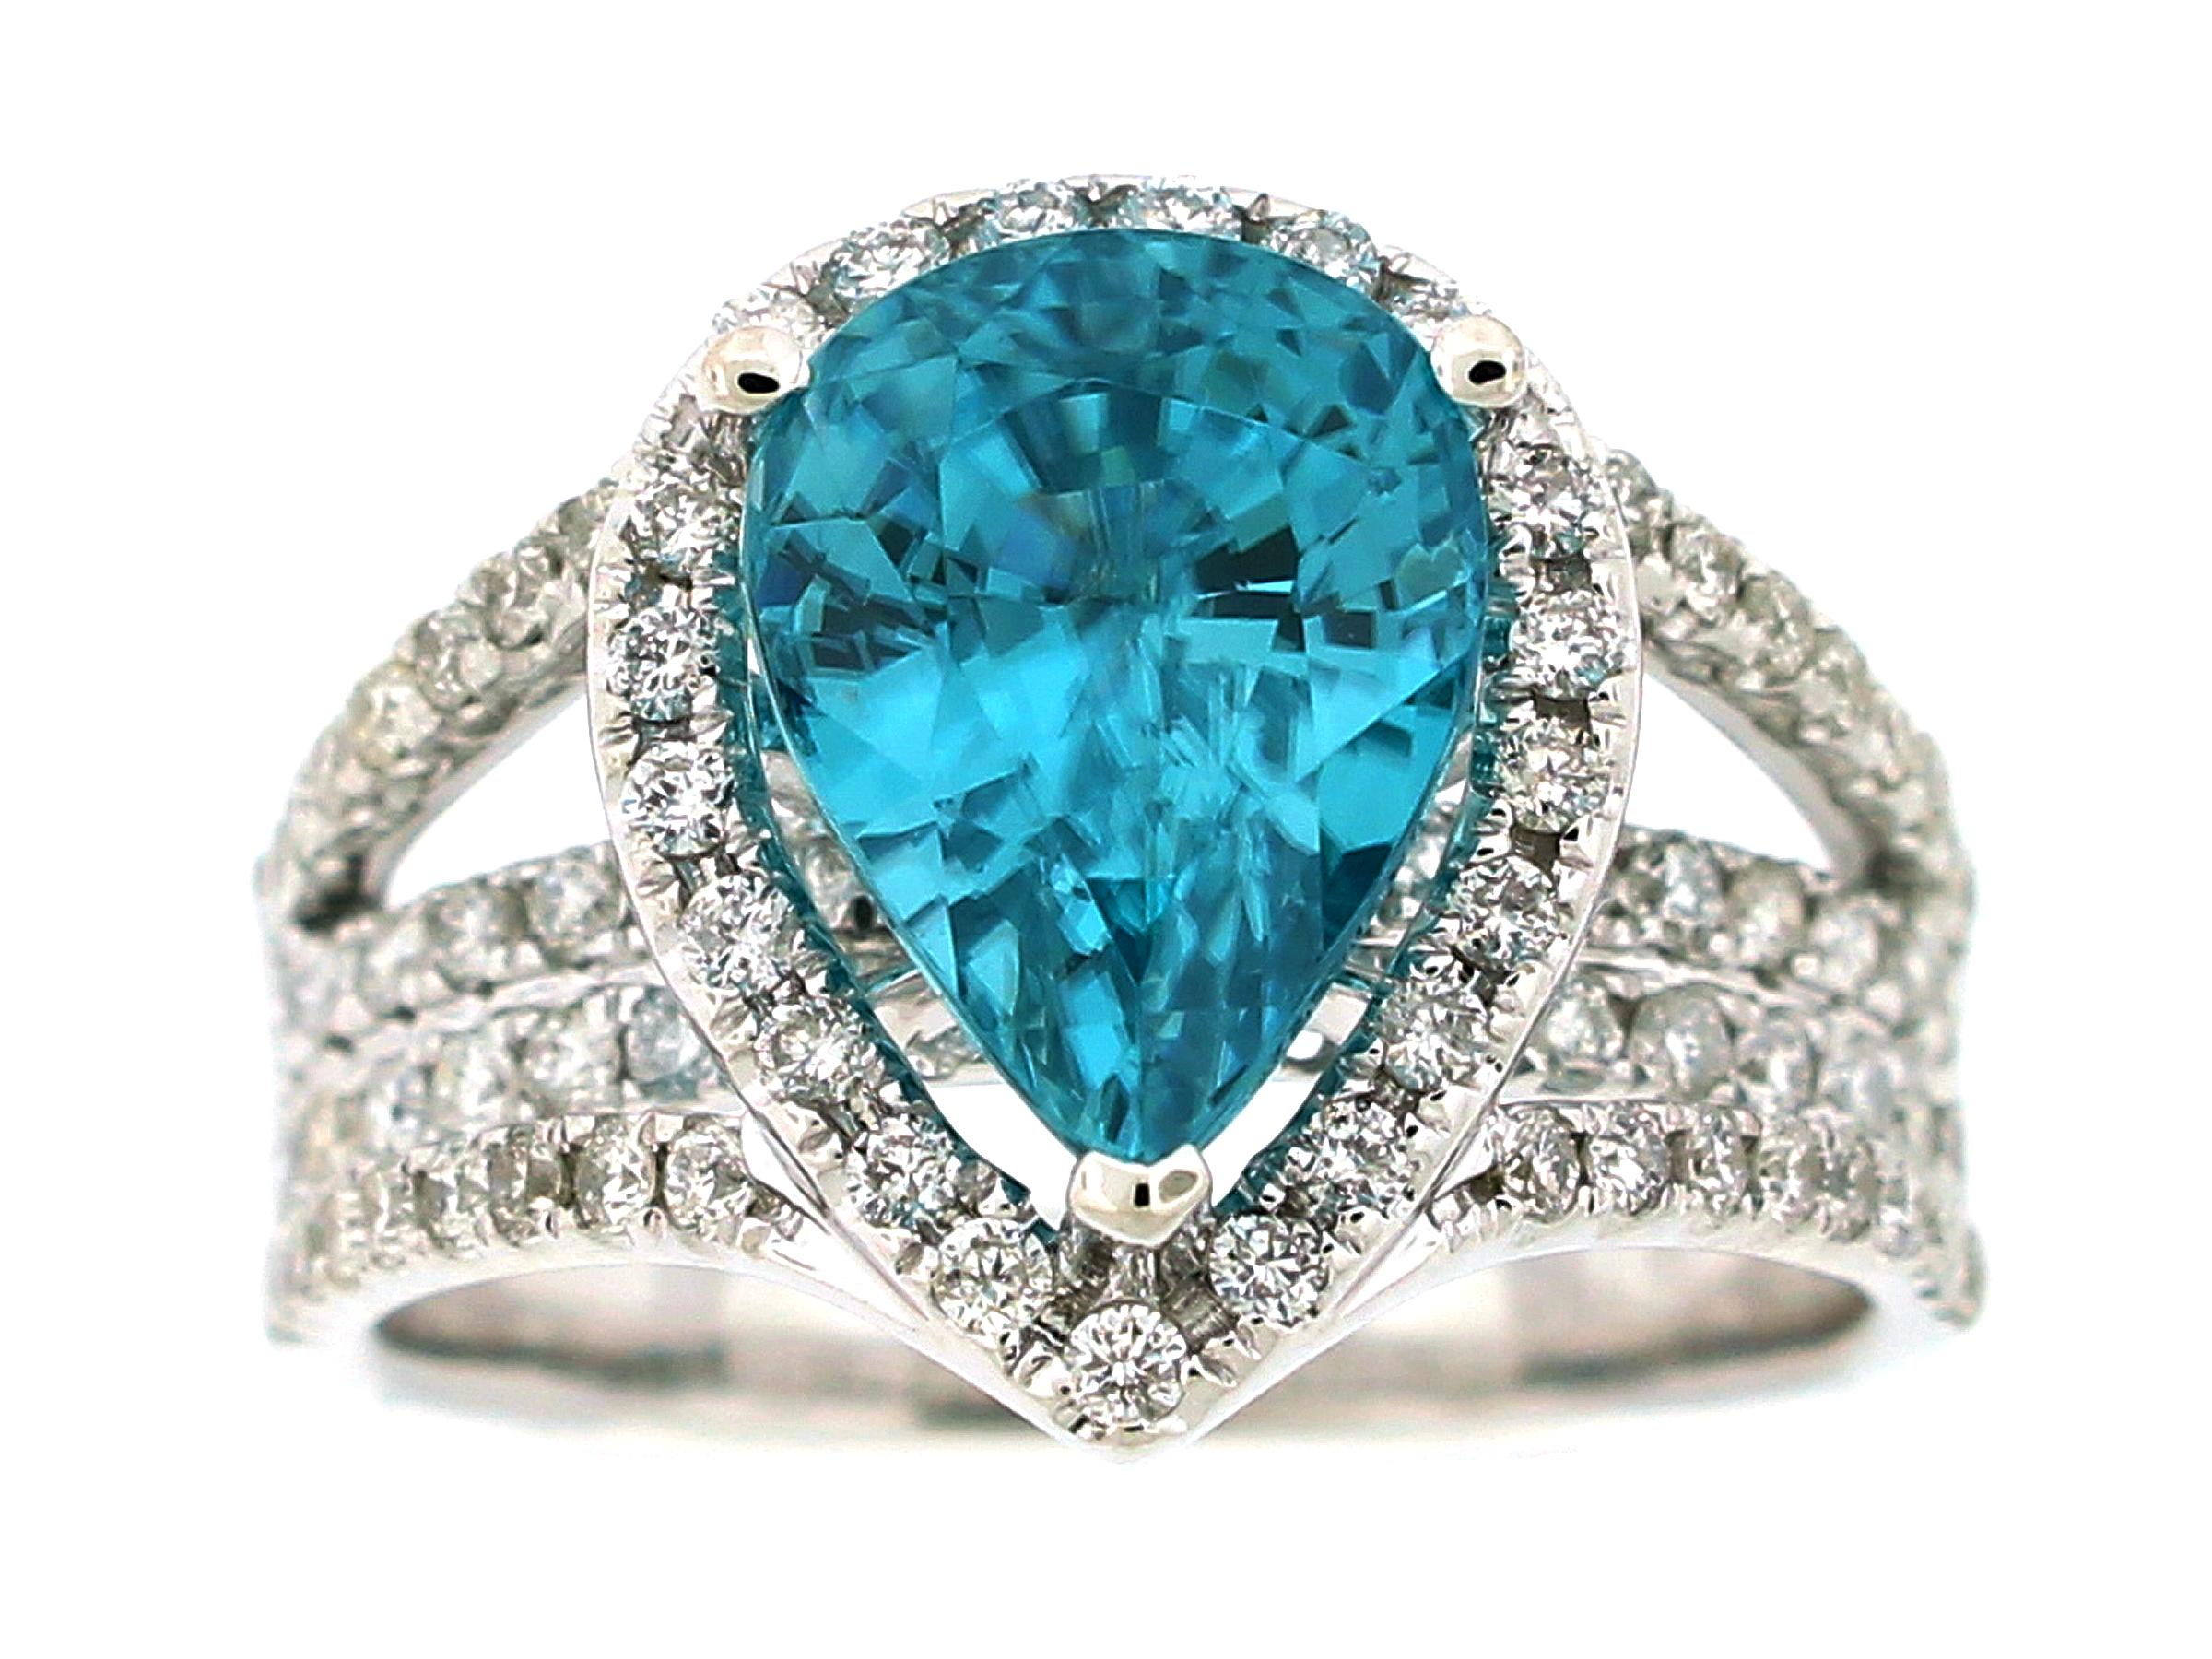 This stunning cocktail ring showcases a beautiful 5.61 Carat Pear Shape Blue Zircon with a Diamond Halo on a quadruple diamond shank. This ring is set in 18k white gold. Total diamond weight = 1.01 carats. Ring Size is 7.